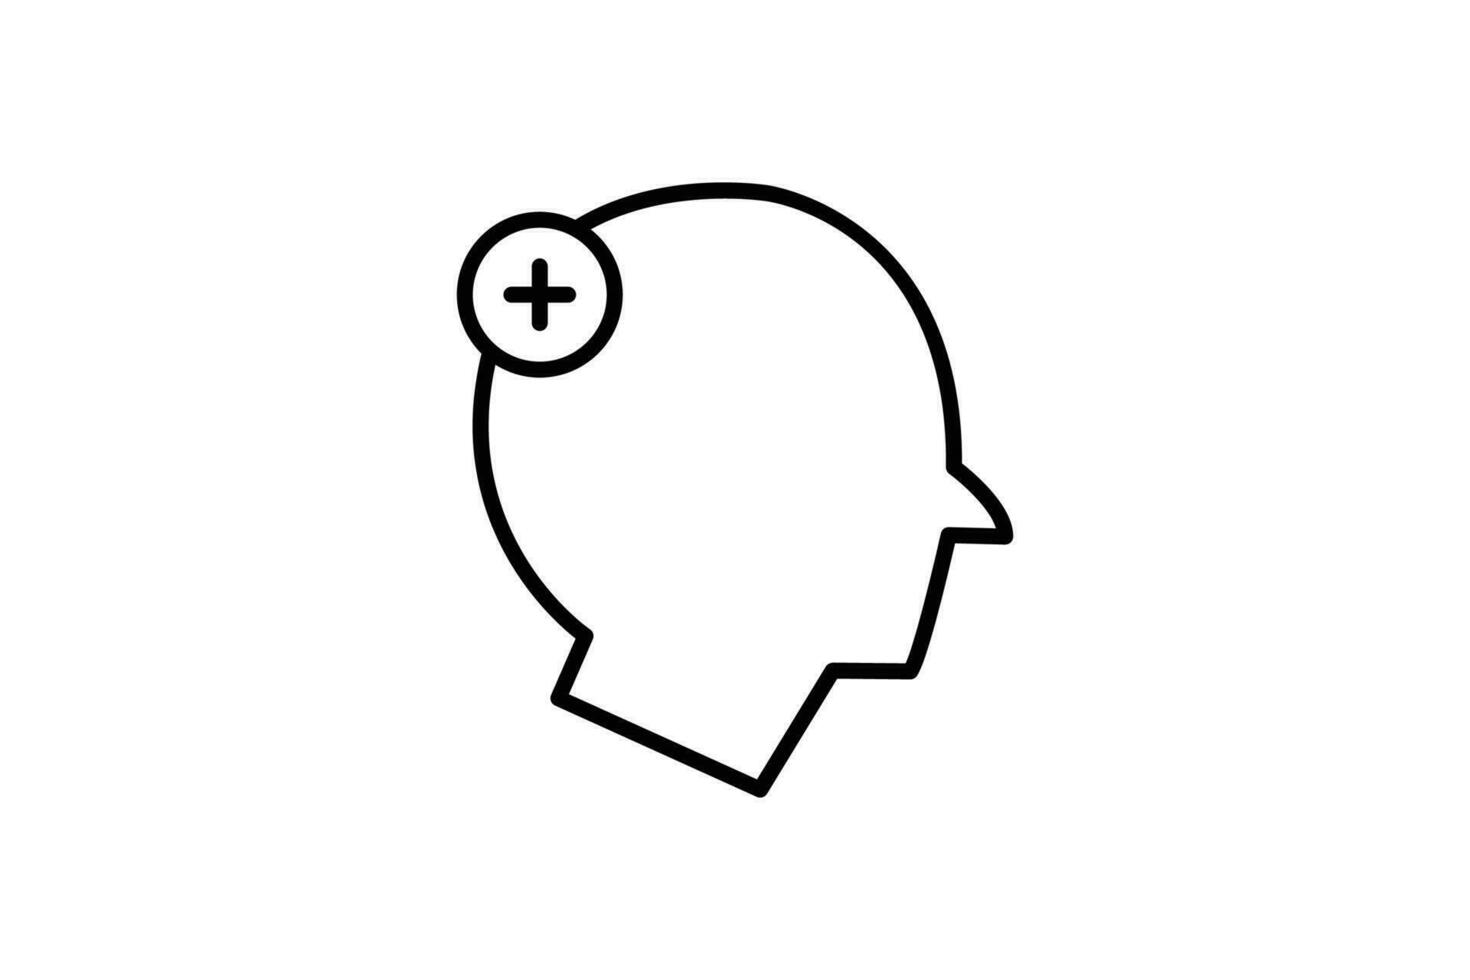 Positive thinking icon. Icon related to critical thinking. suitable for web site design, app, UI, user interfaces, printable etc. Line icon style. Simple vector design editable